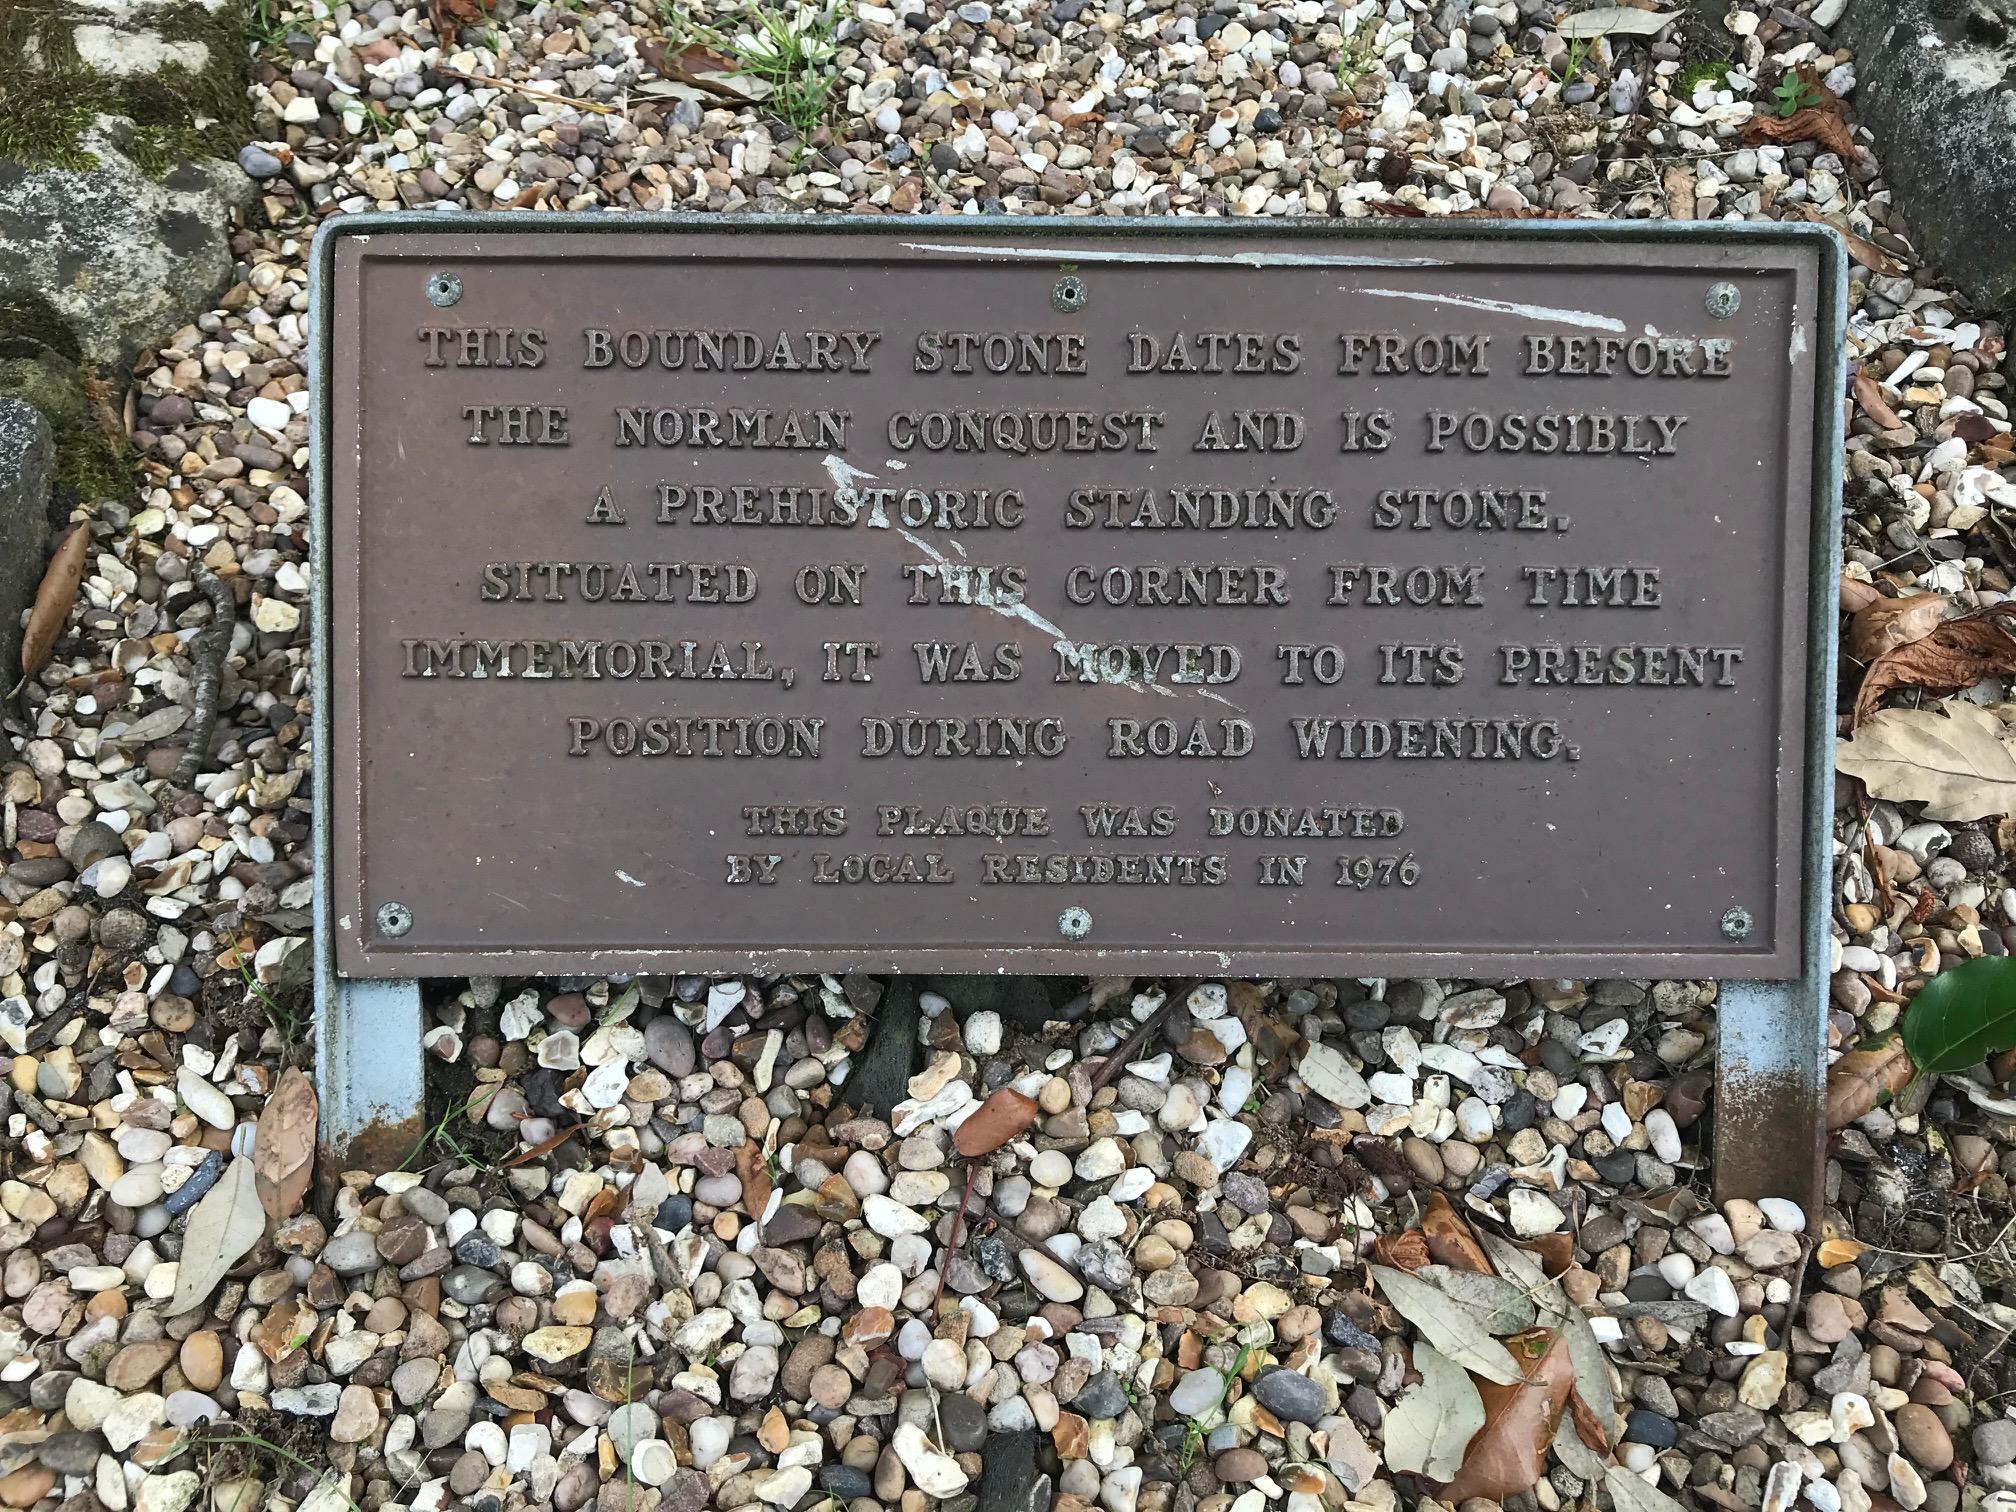 Rectangular plaque of brown-coloured bronze with embossed upper case writing, supported by two thin metal legs. Surrounded by gravel.